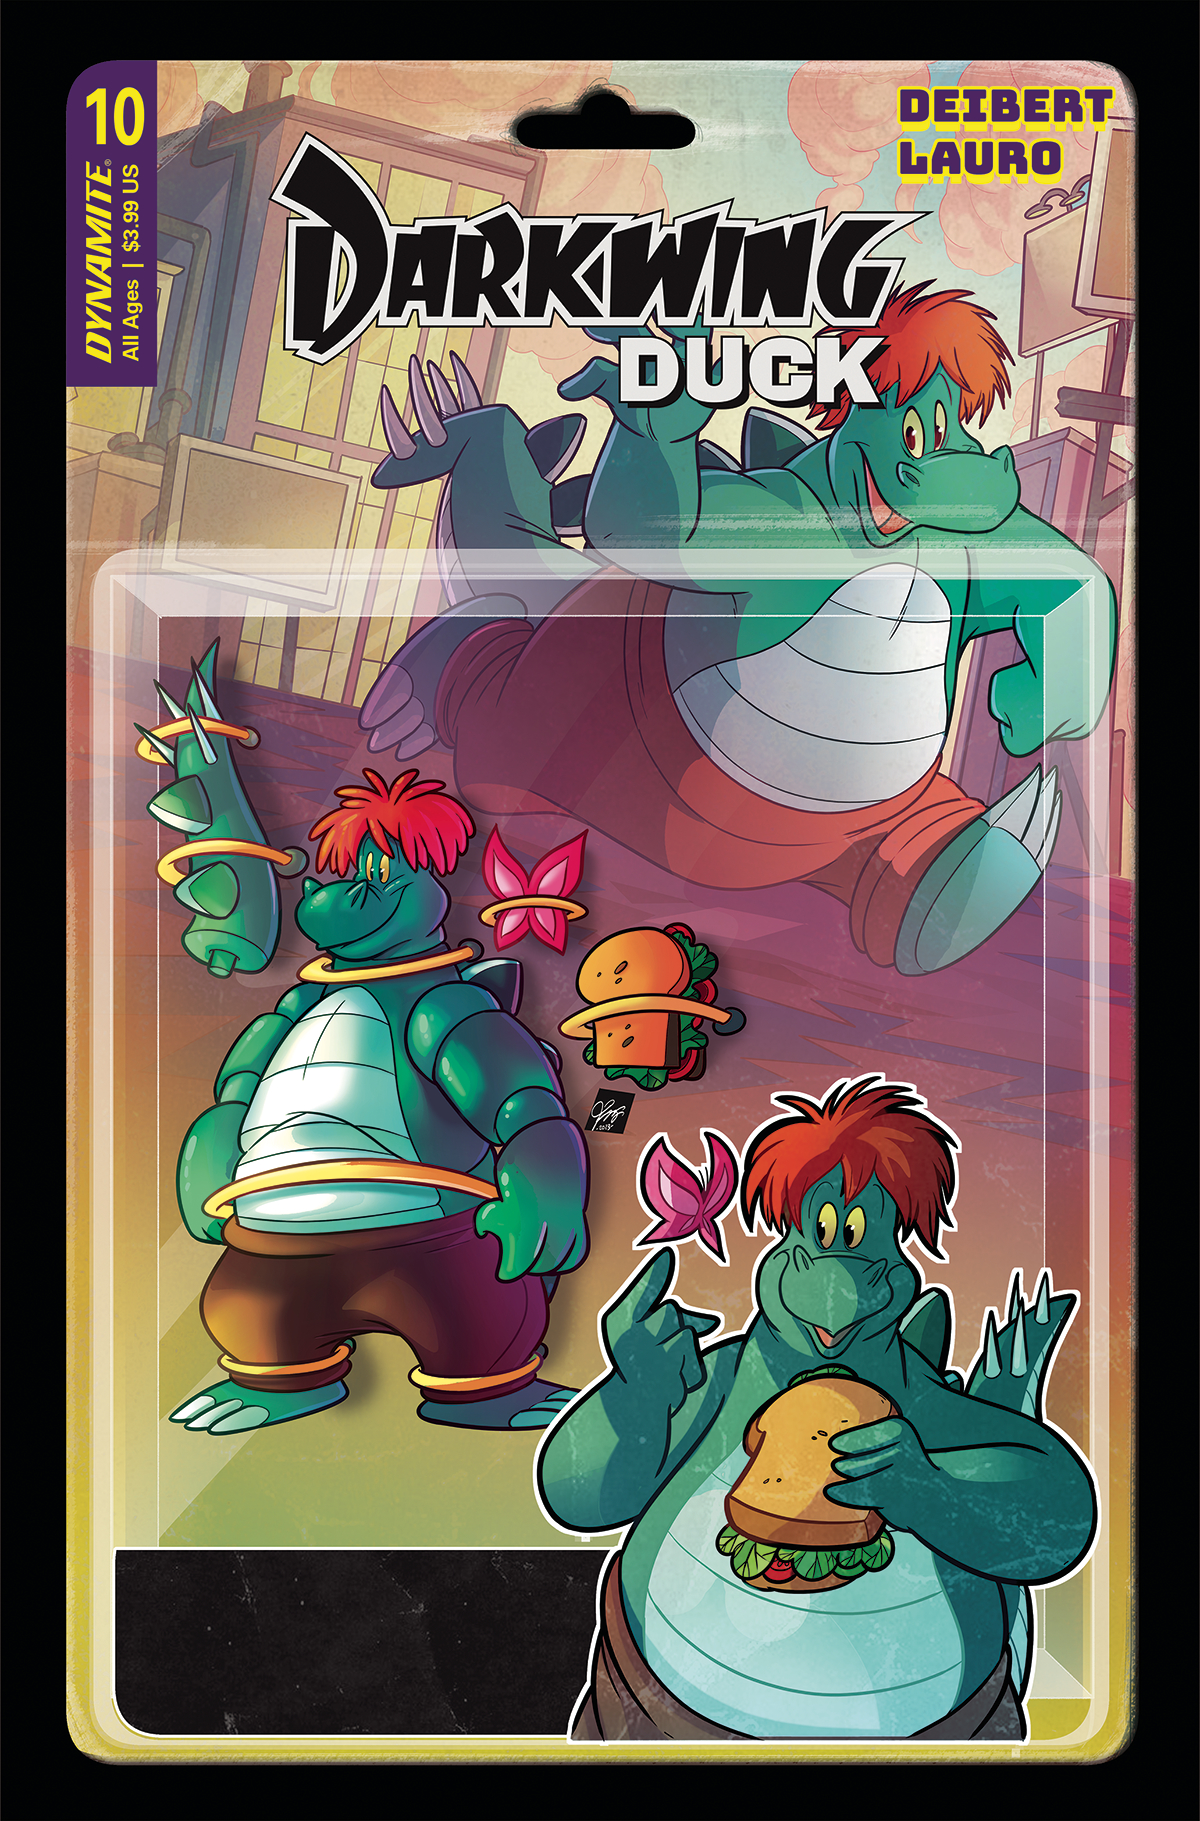 Darkwing Duck #9 Cover H 1 for 10 Incentive Action Figure